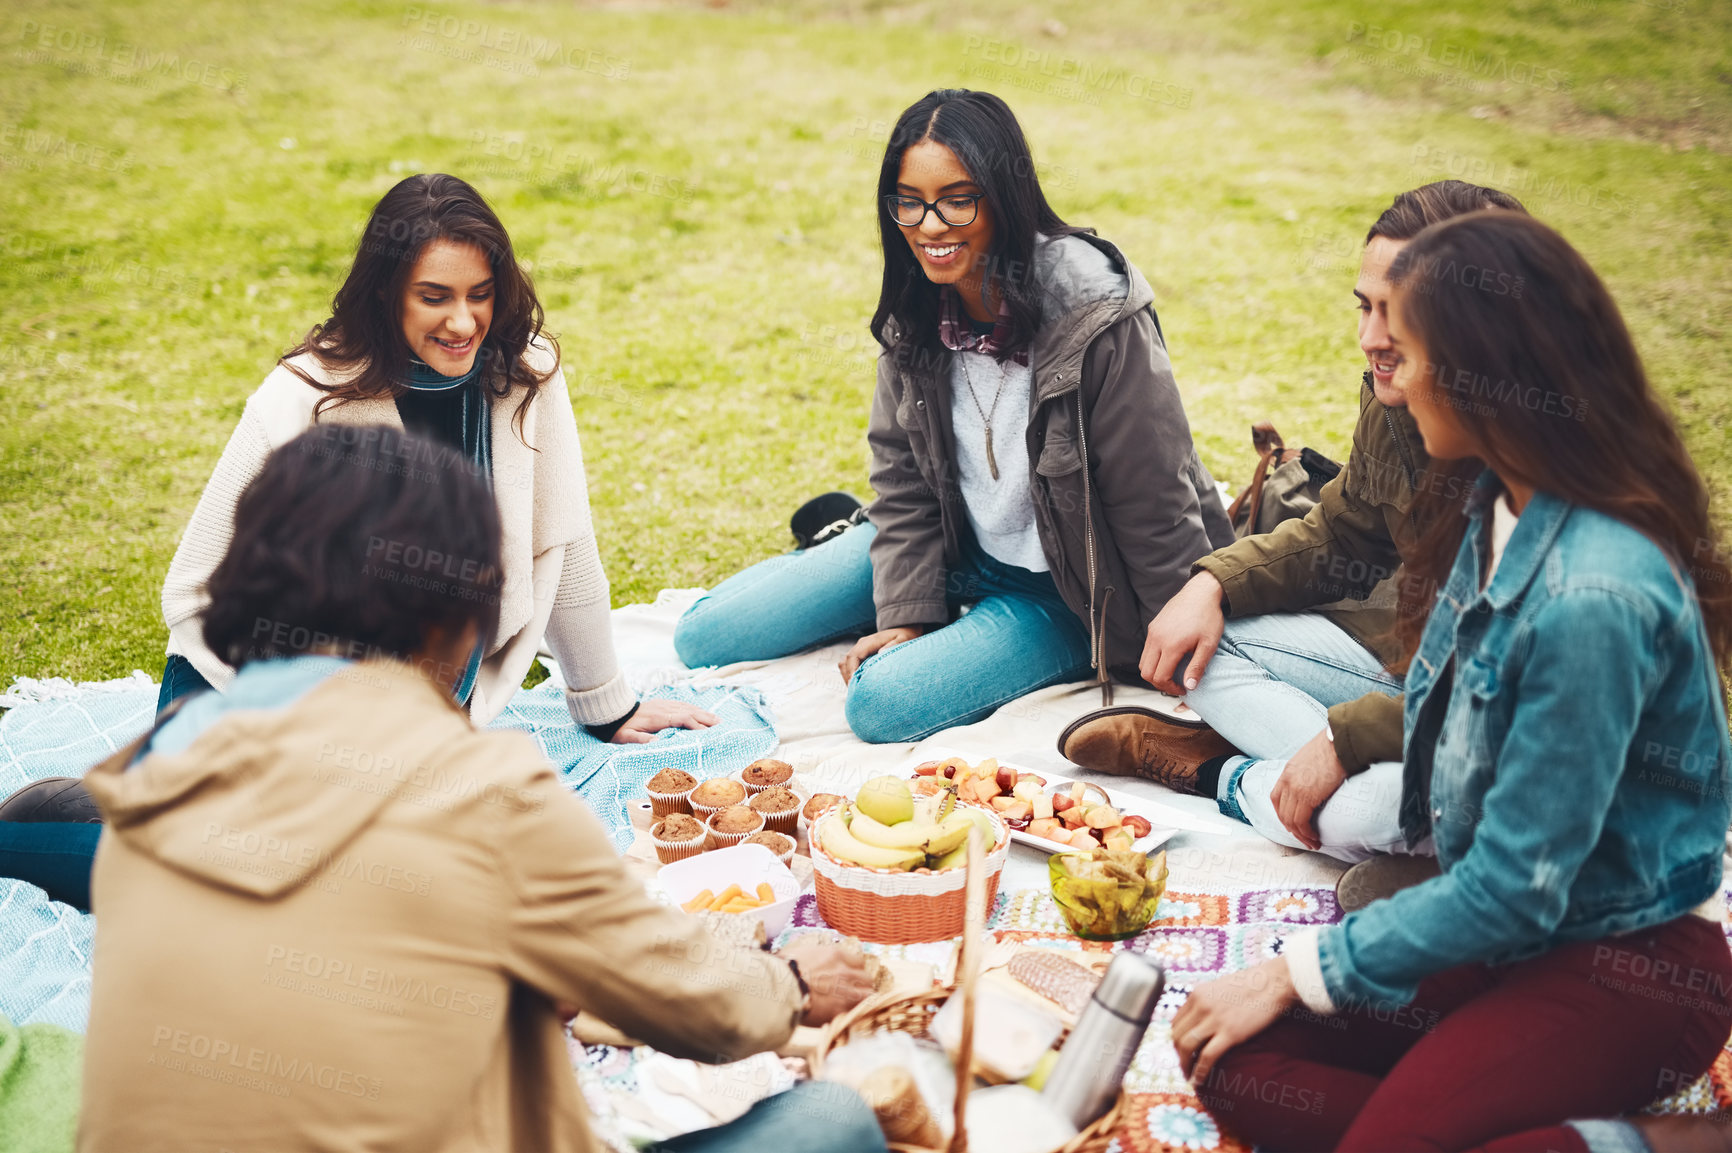 Buy stock photo Shot of a group of cheerful young friends having a picnic together outside in a park during the day